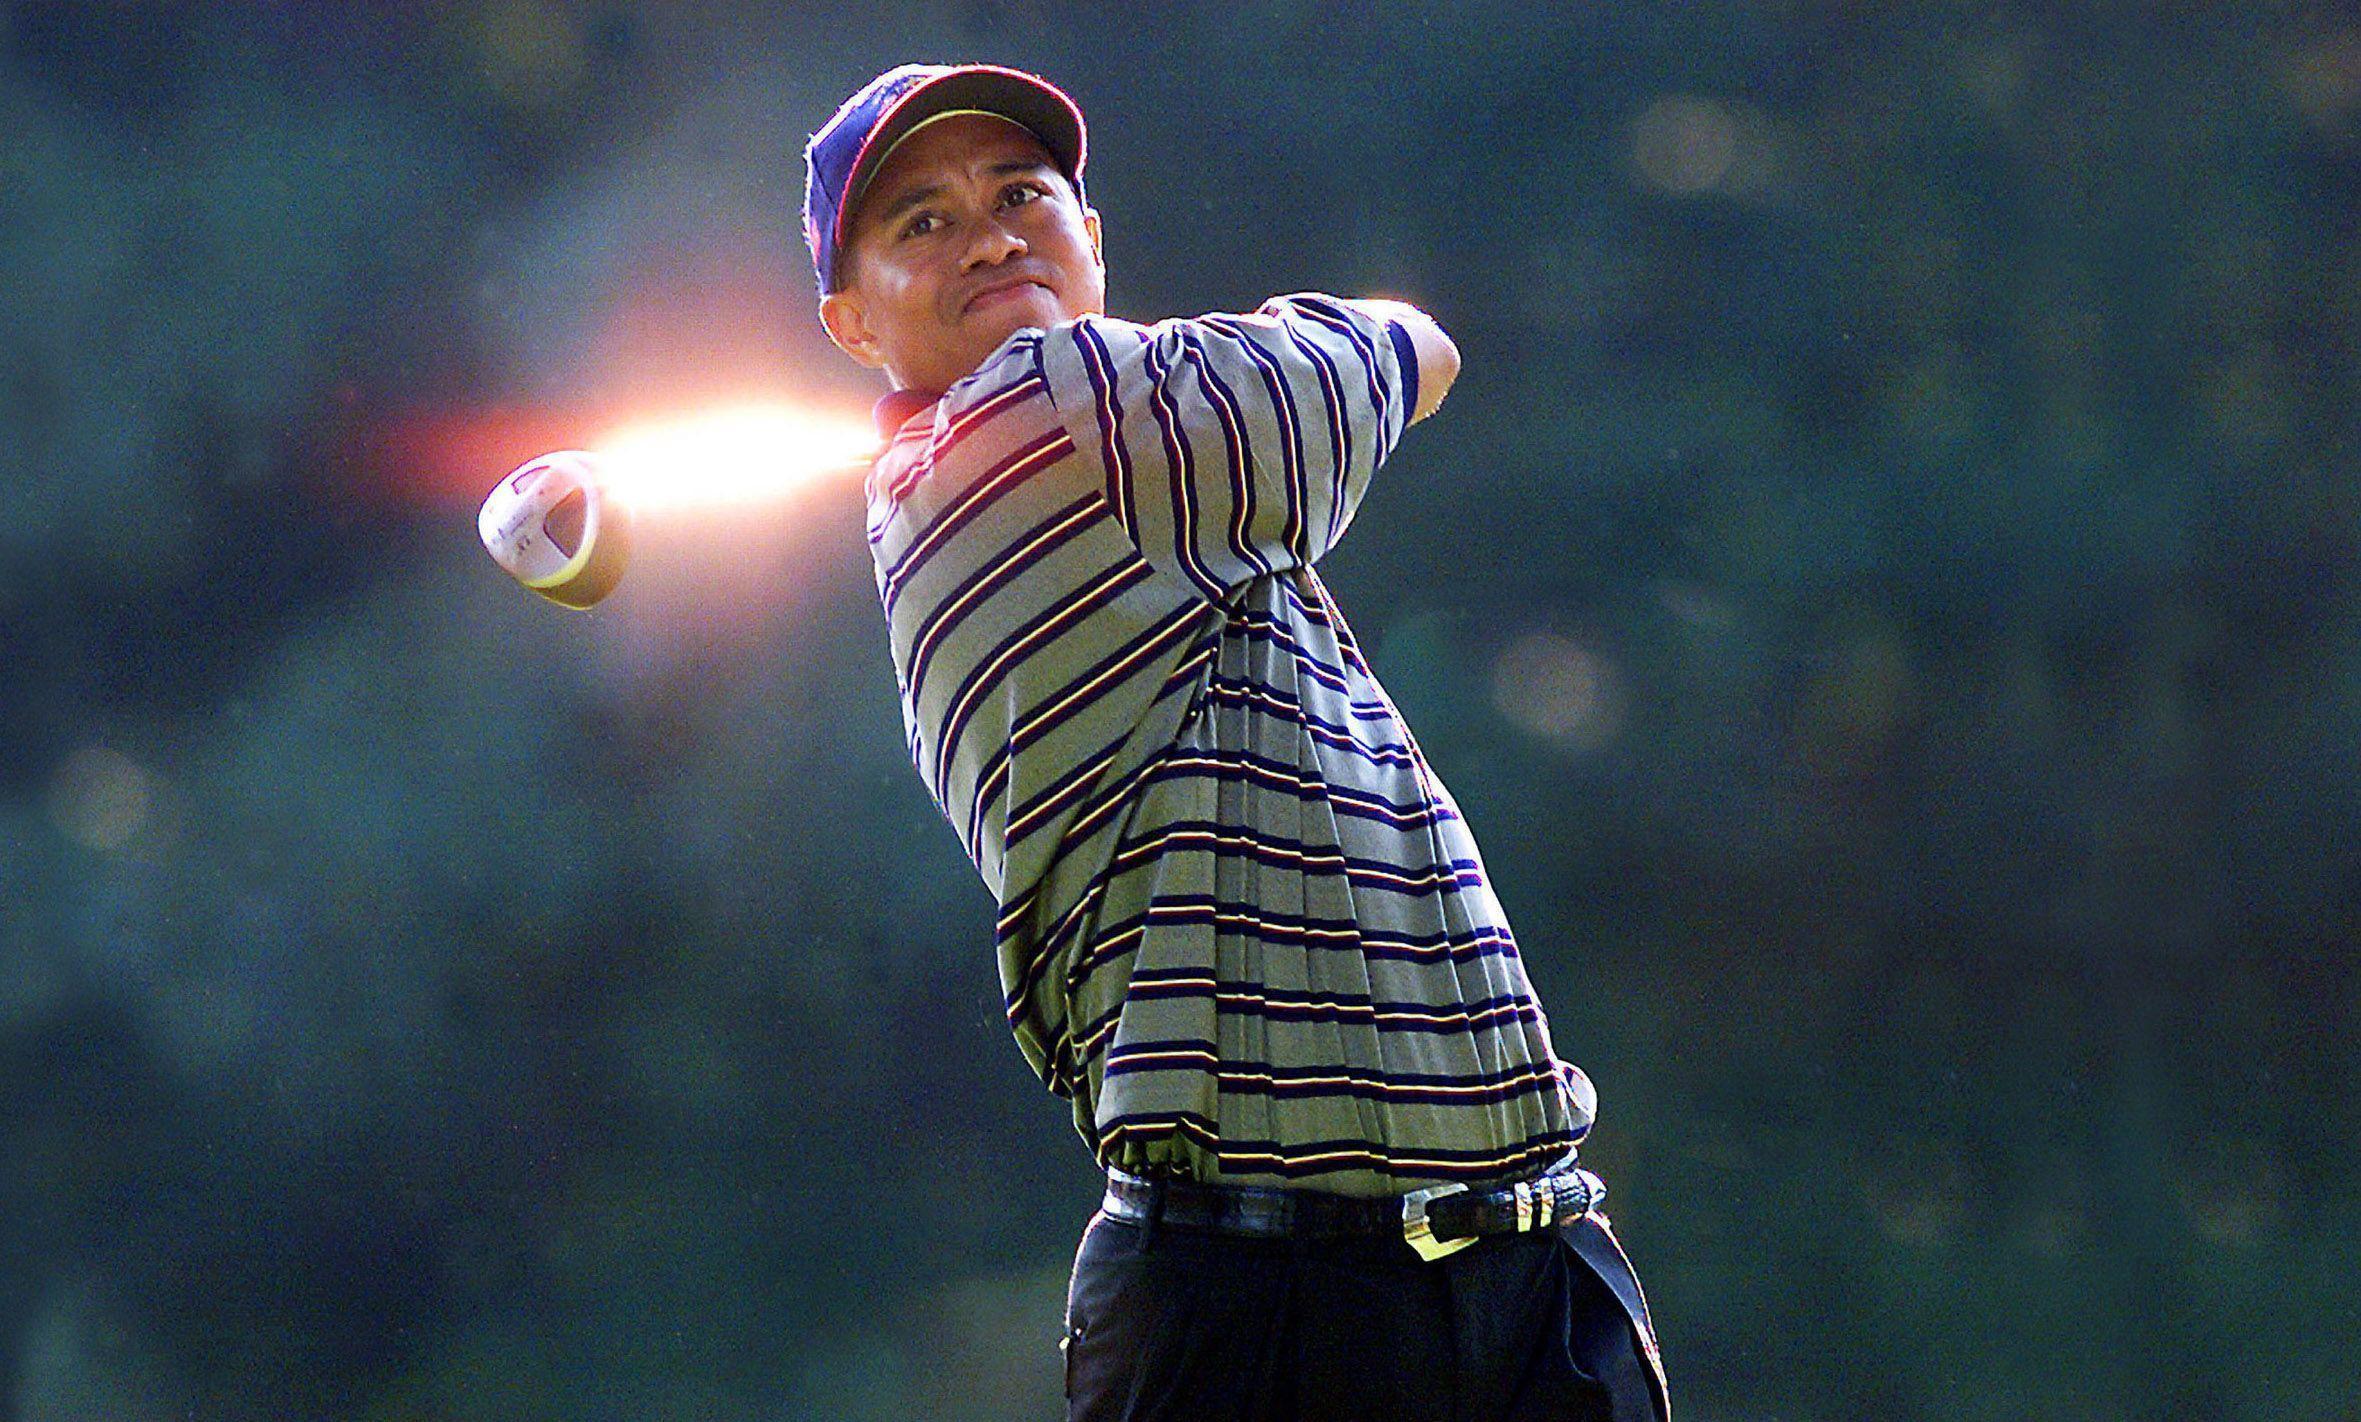 Tiger Woods Hd Wallpapers